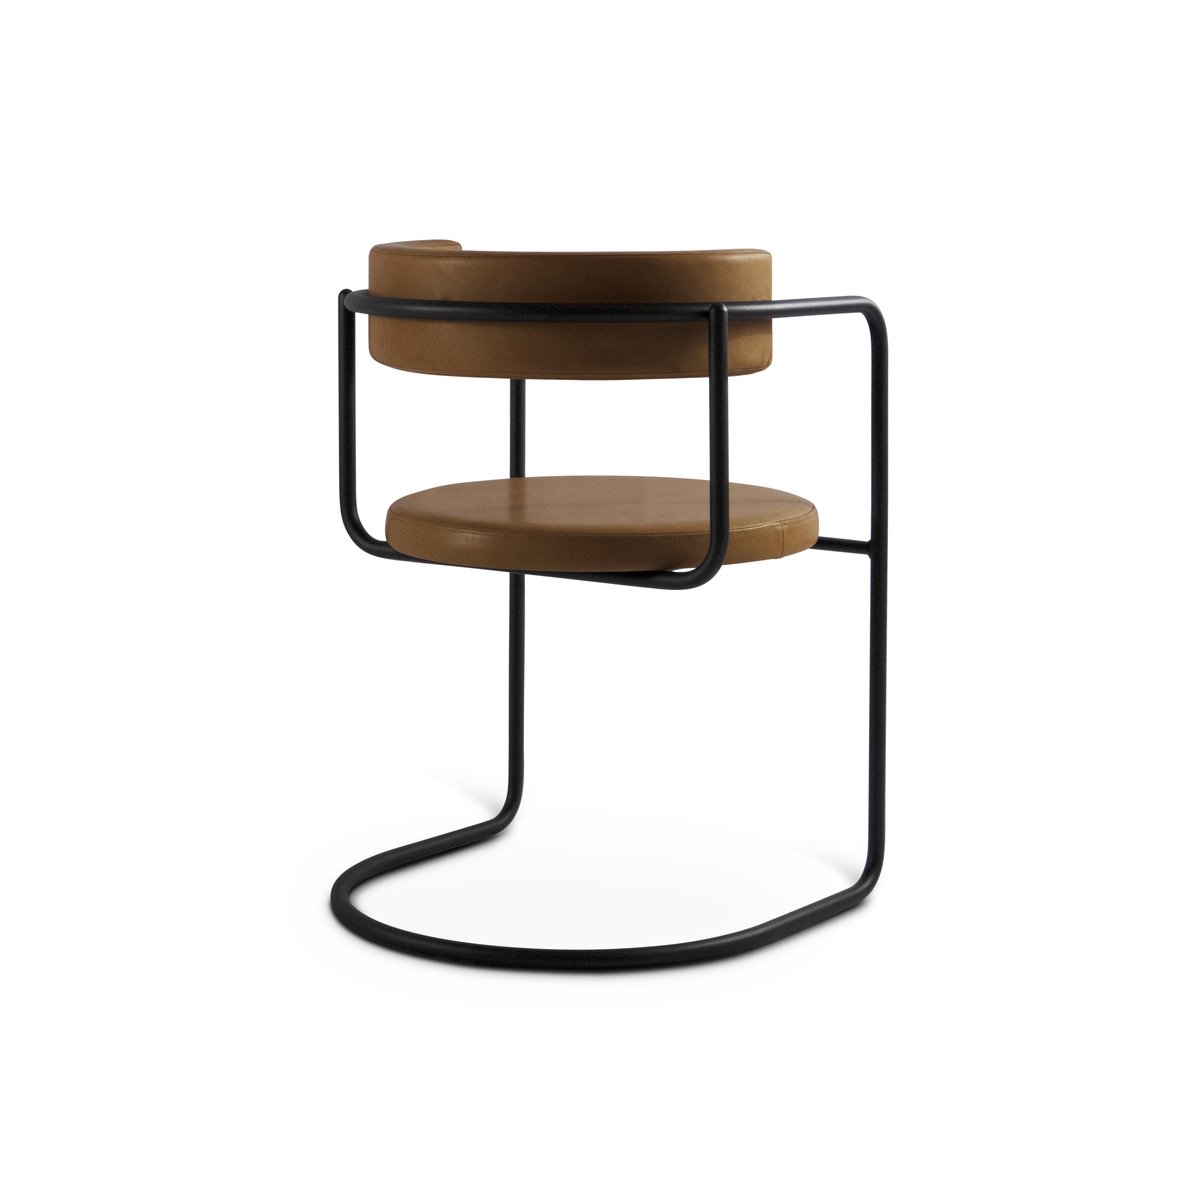 The FF Chair - Cantilever